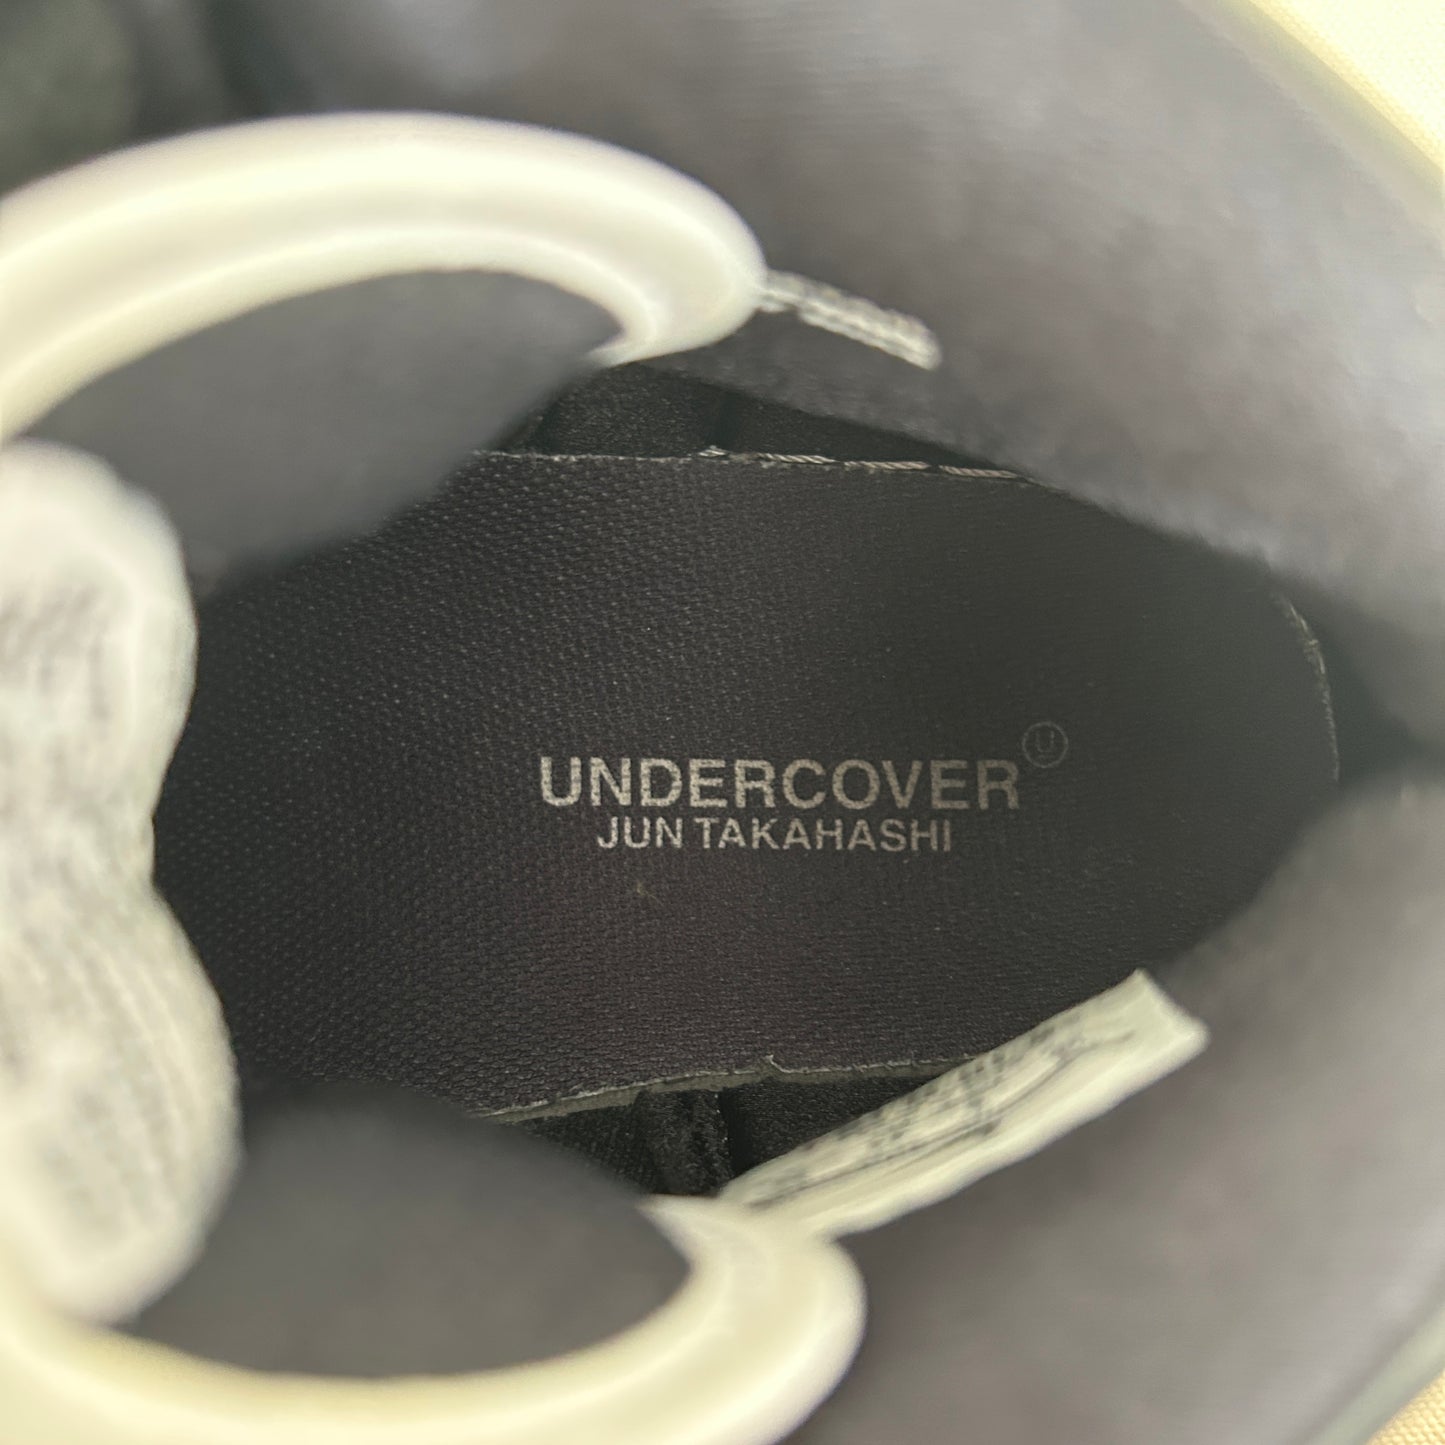 NIKE×UNDER COVER Middle cut